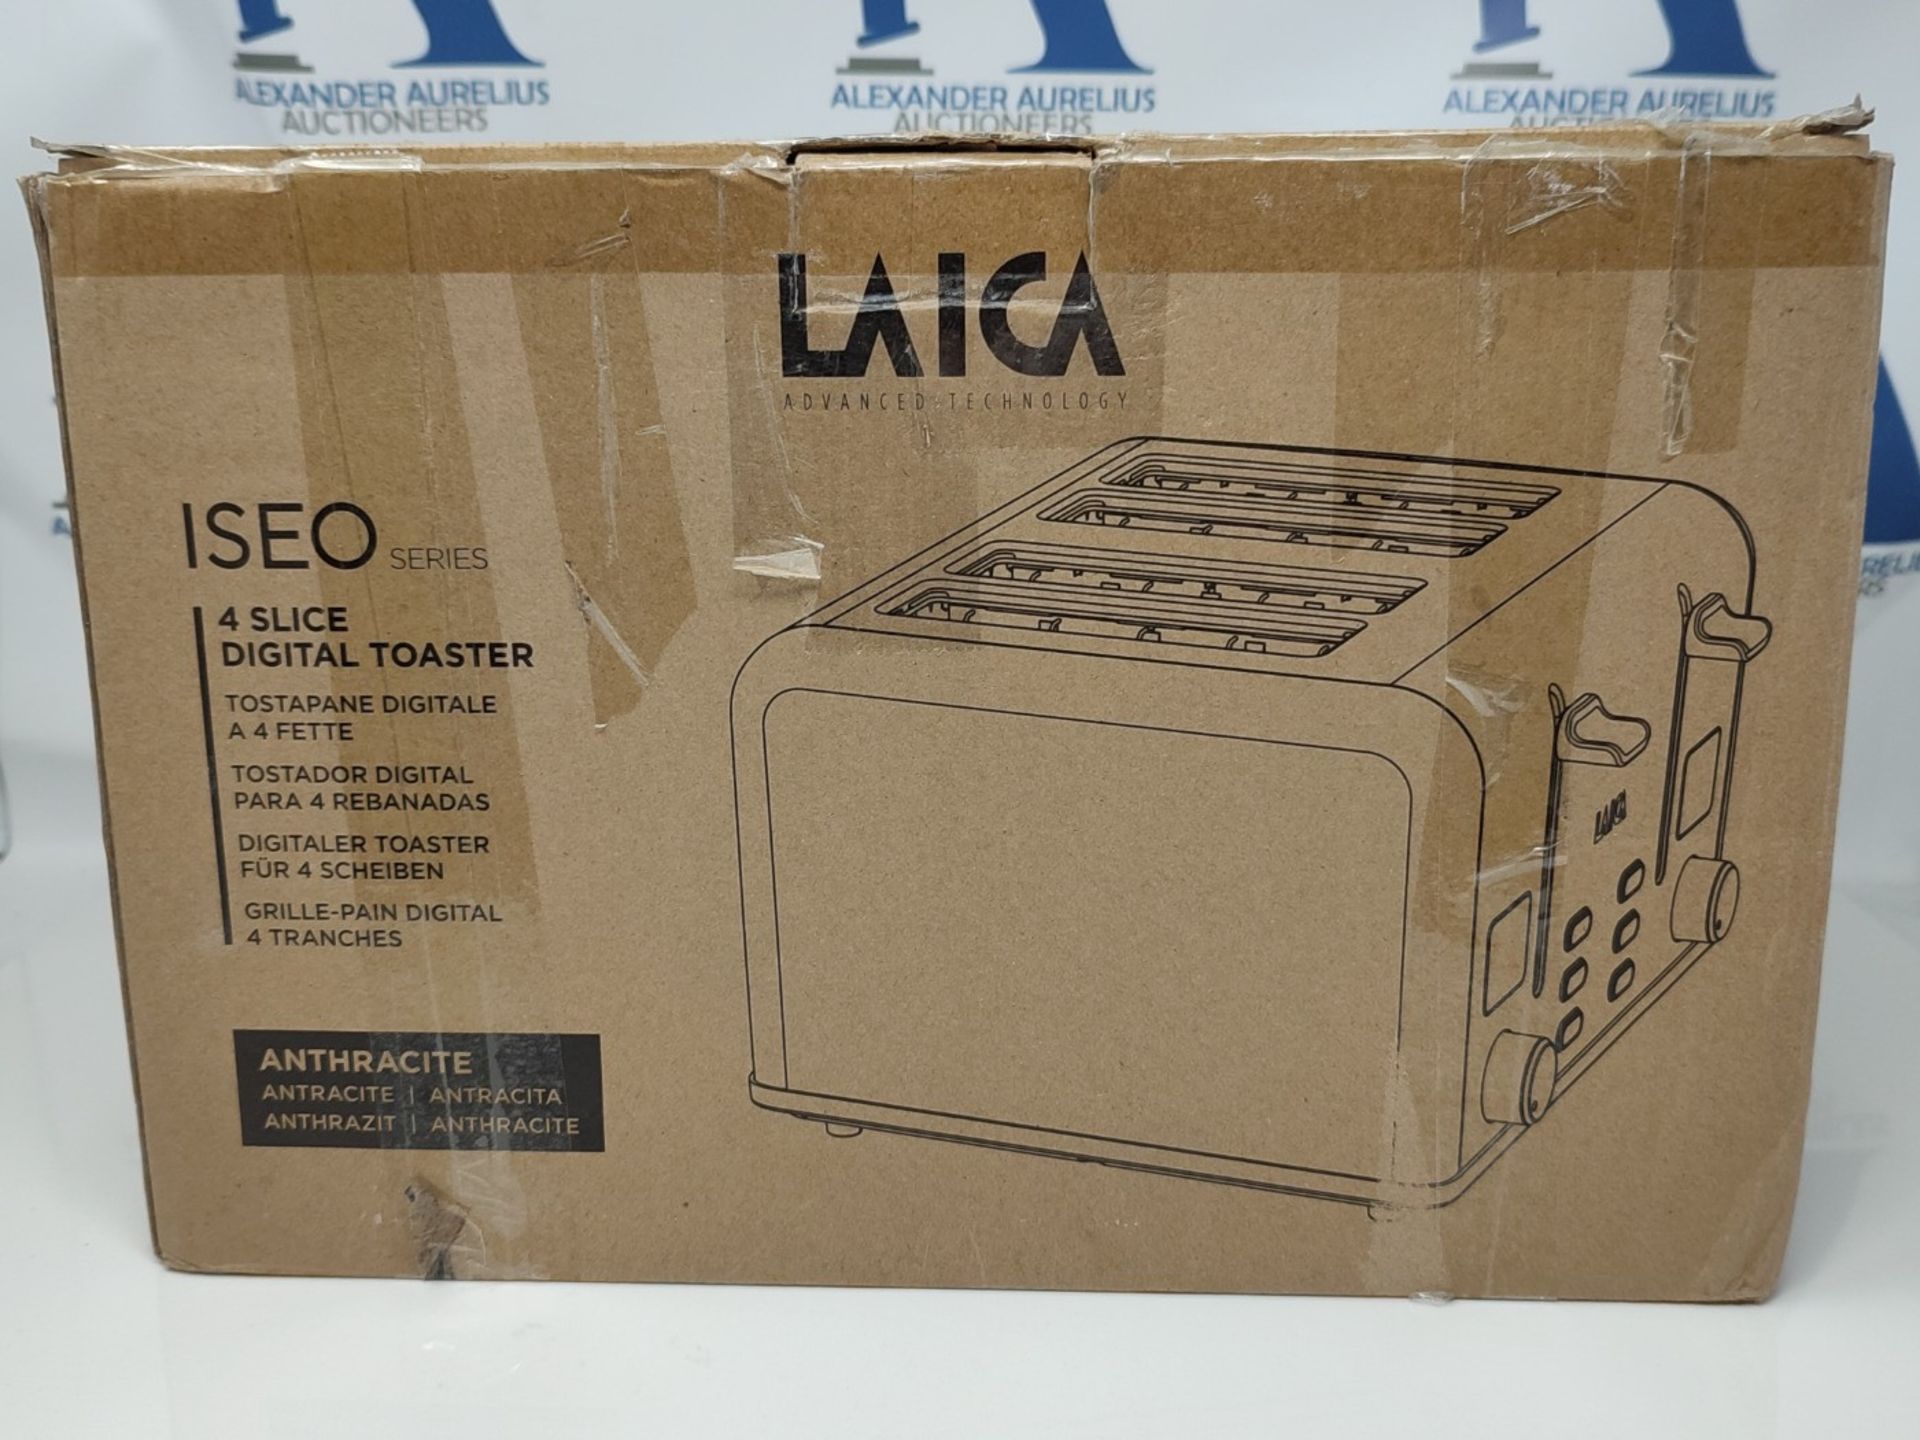 LAICA ISEO 4 slice digital toaster with Independent High Lift & Extra-Wide Slots, Defr - Bild 2 aus 2